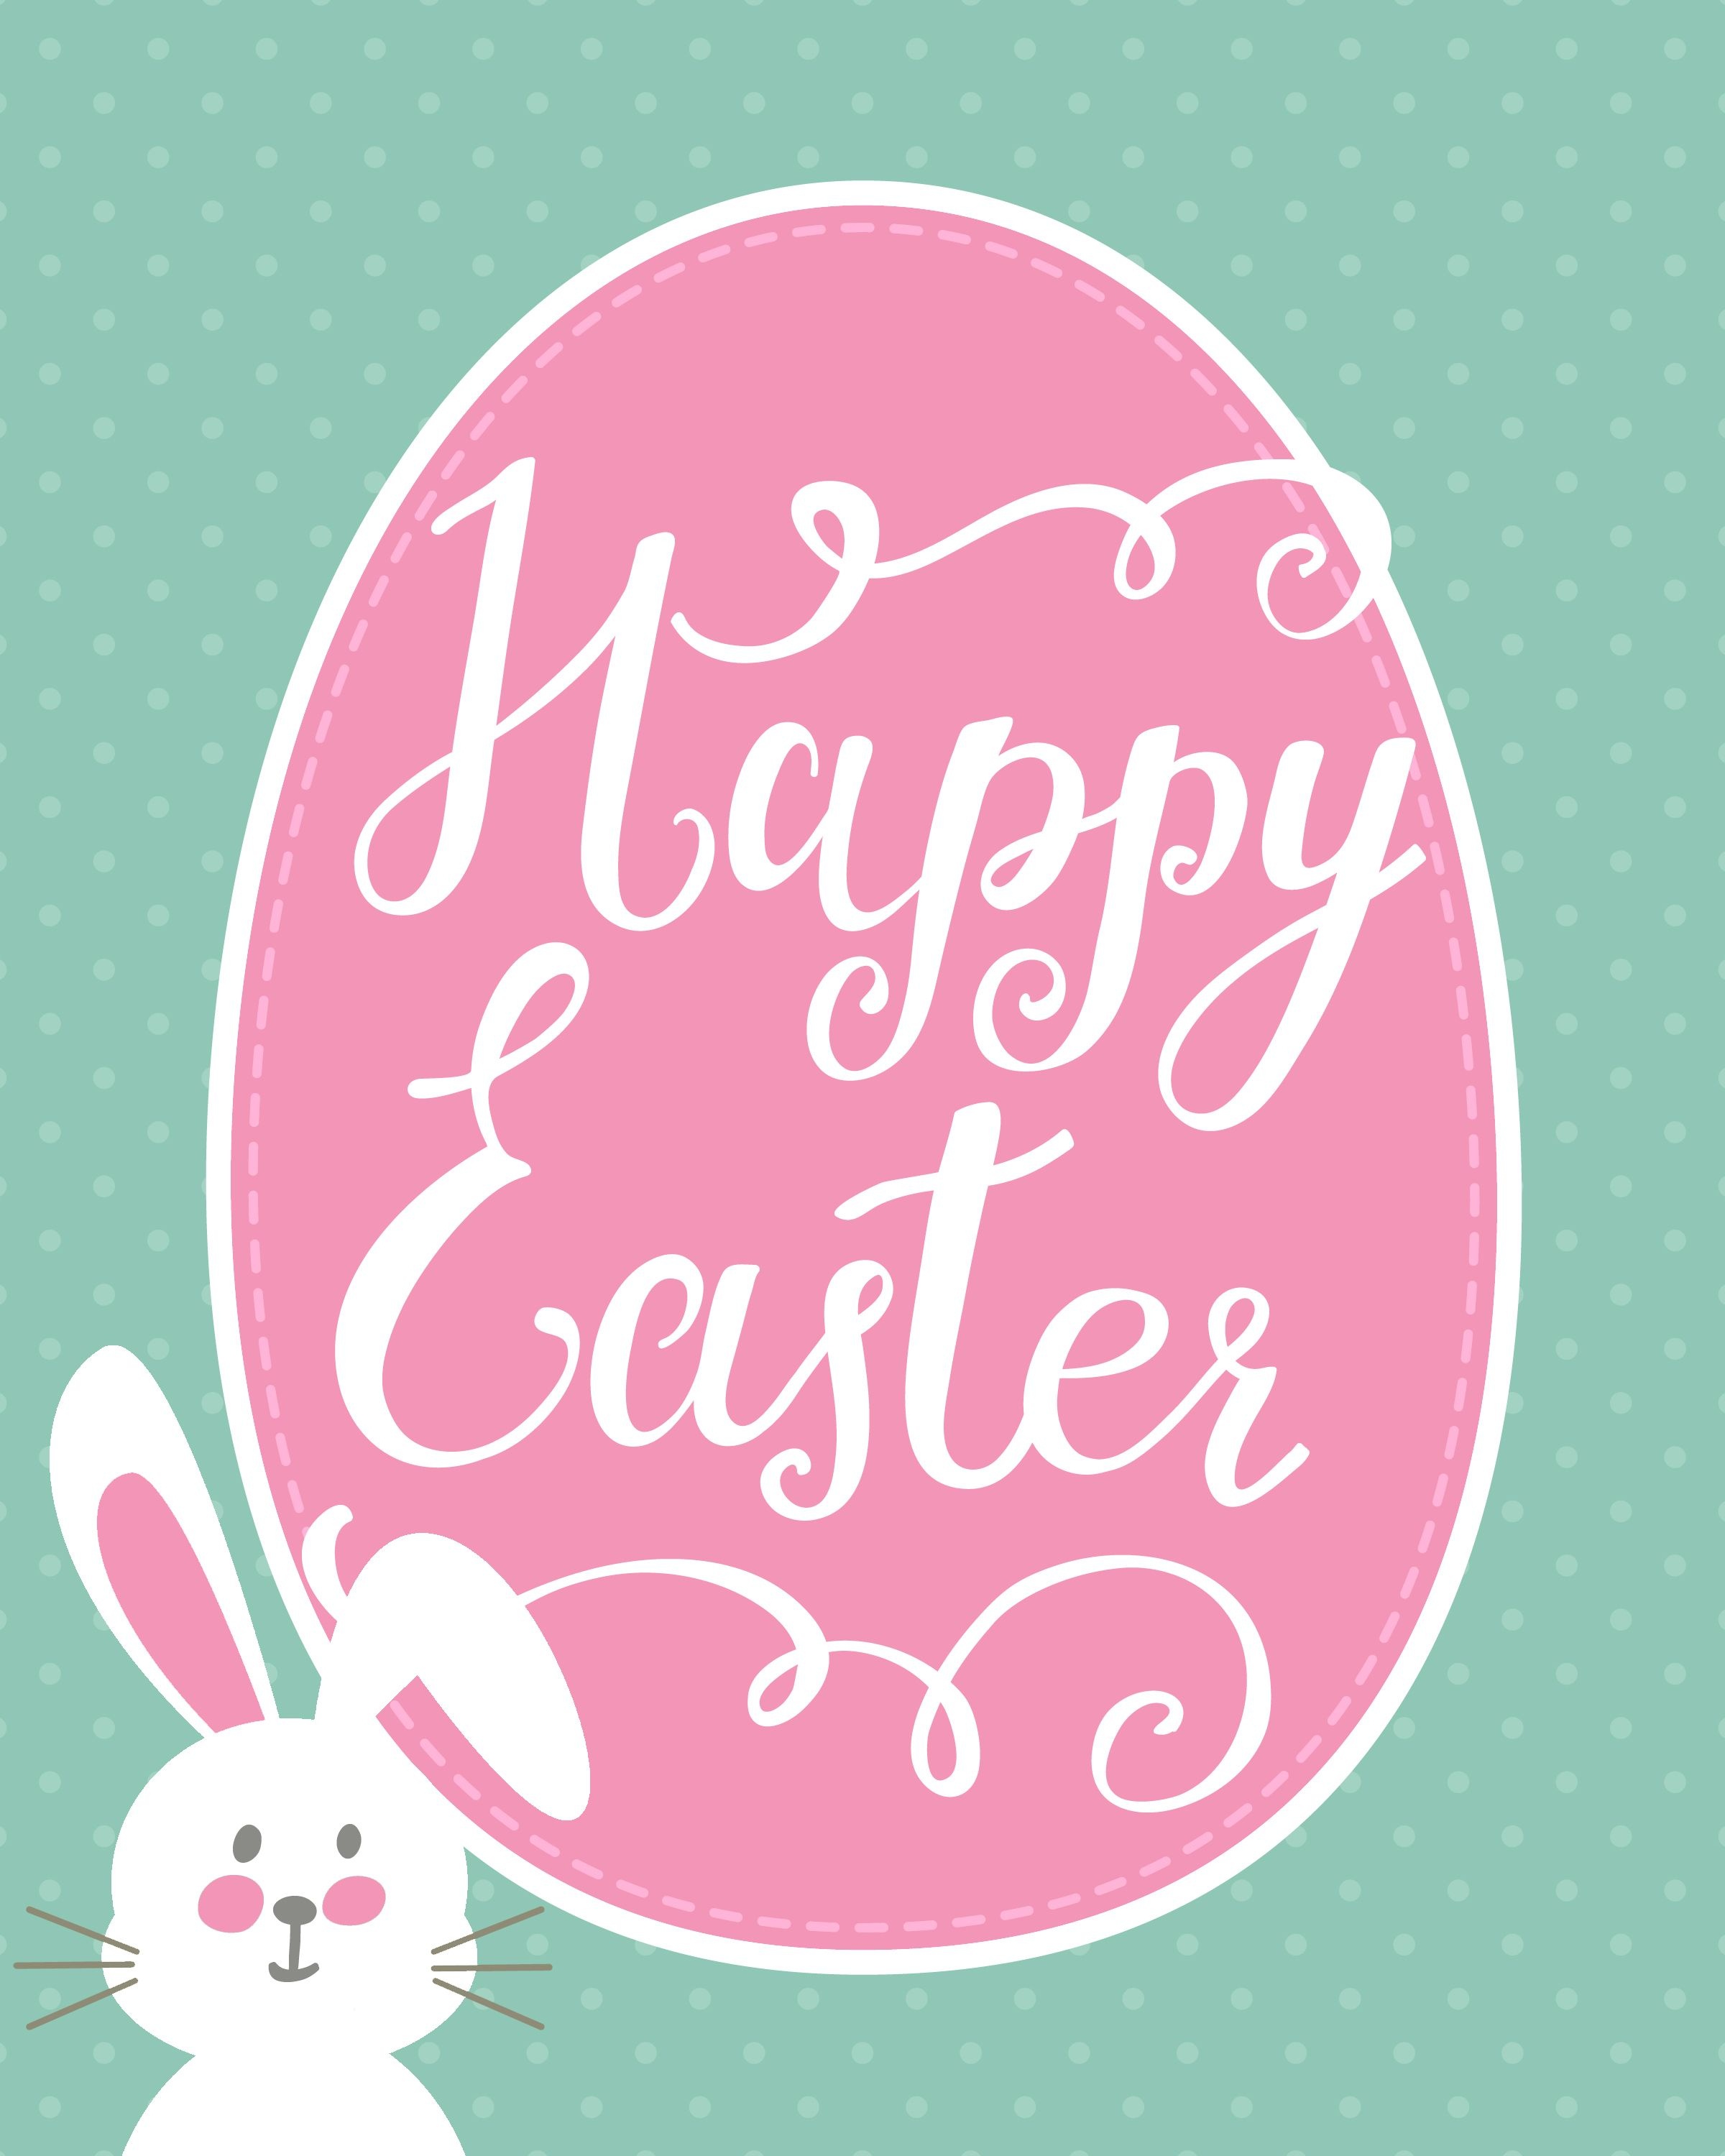 Happy Easter Bunny Printable | Holidays - Easter | Happy Easter - Printable Easter Greeting Cards Free